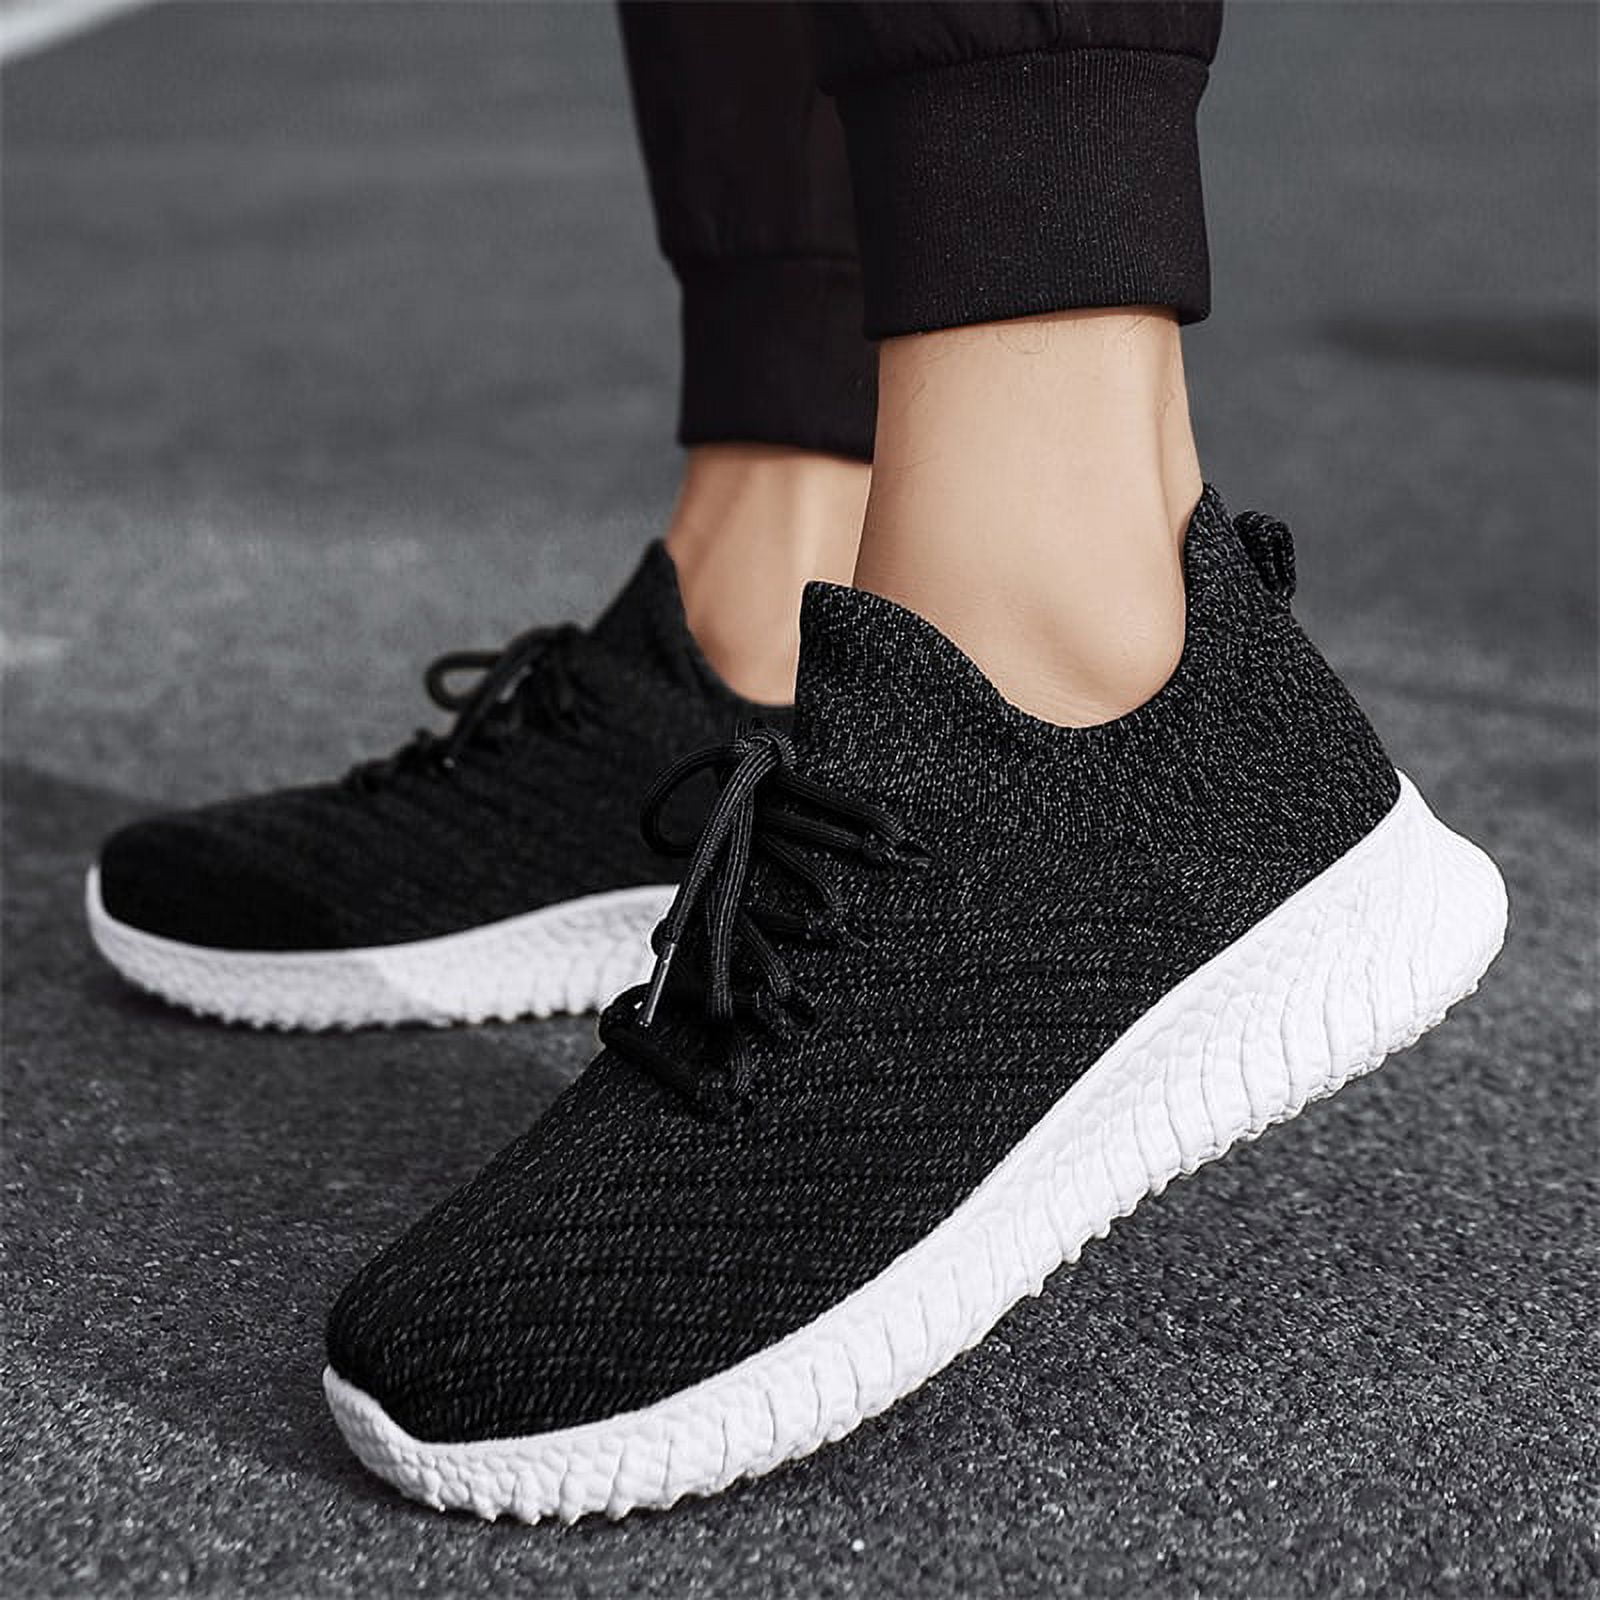  Lamincoa Men's Tennis Walking Shoes Slip On Lightweight  Athletic Fashion Casual Sneakers for Running Gym Jogging Fitness Black US 7